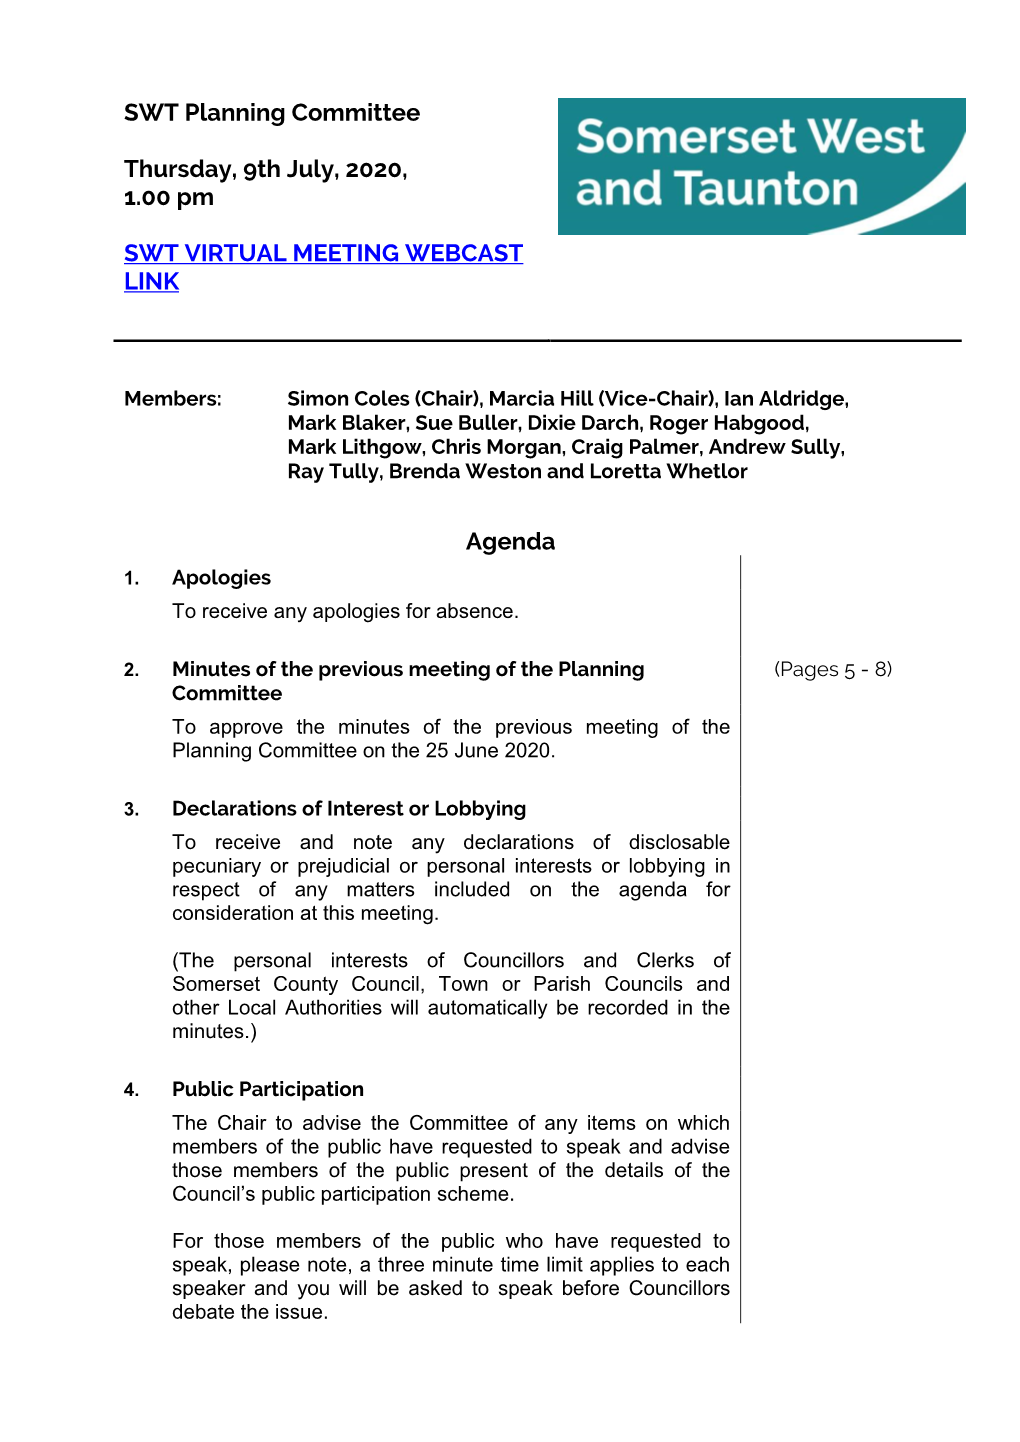 Agenda Document for SWT Planning Committee, 09/07/2020 13:00